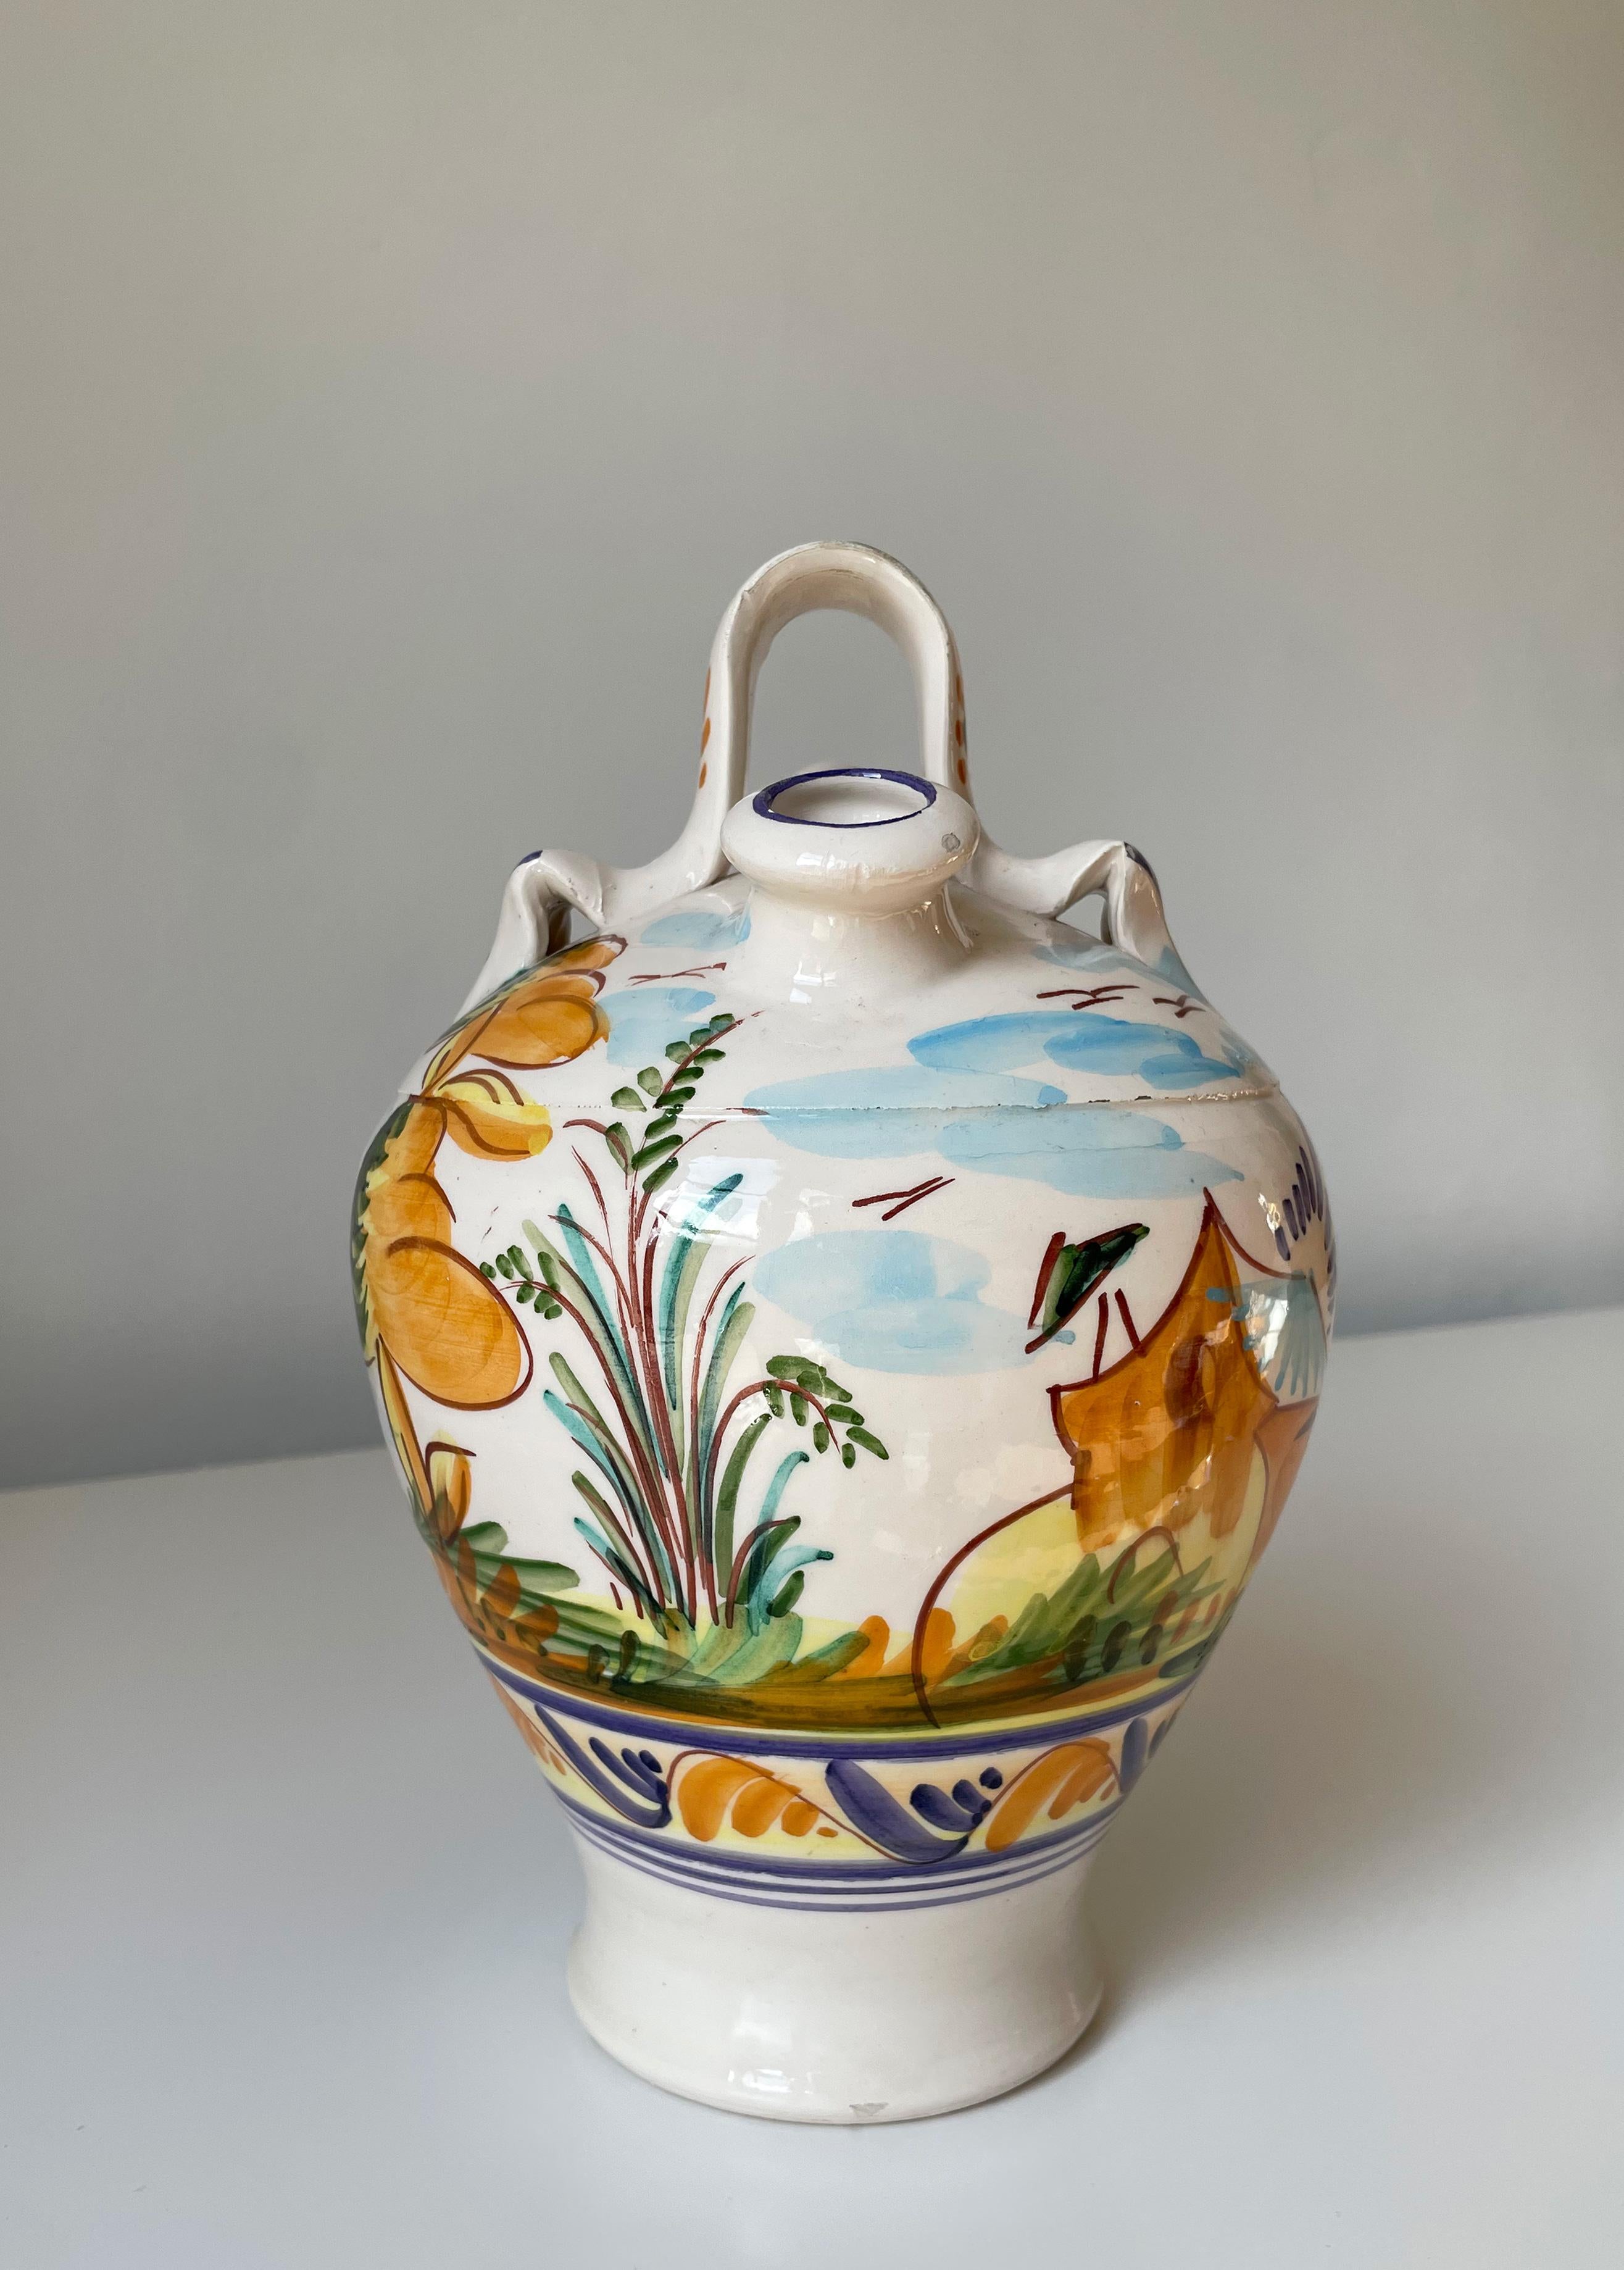 Italian ceramic pitcher bottle vase with organic floral landscape decorations. Hand-painted yellow, orange, green, blue and brown coloured motifs under clear glaze. Handle on the top and two openings - one very narrow, the other opening 2.5 cm/1